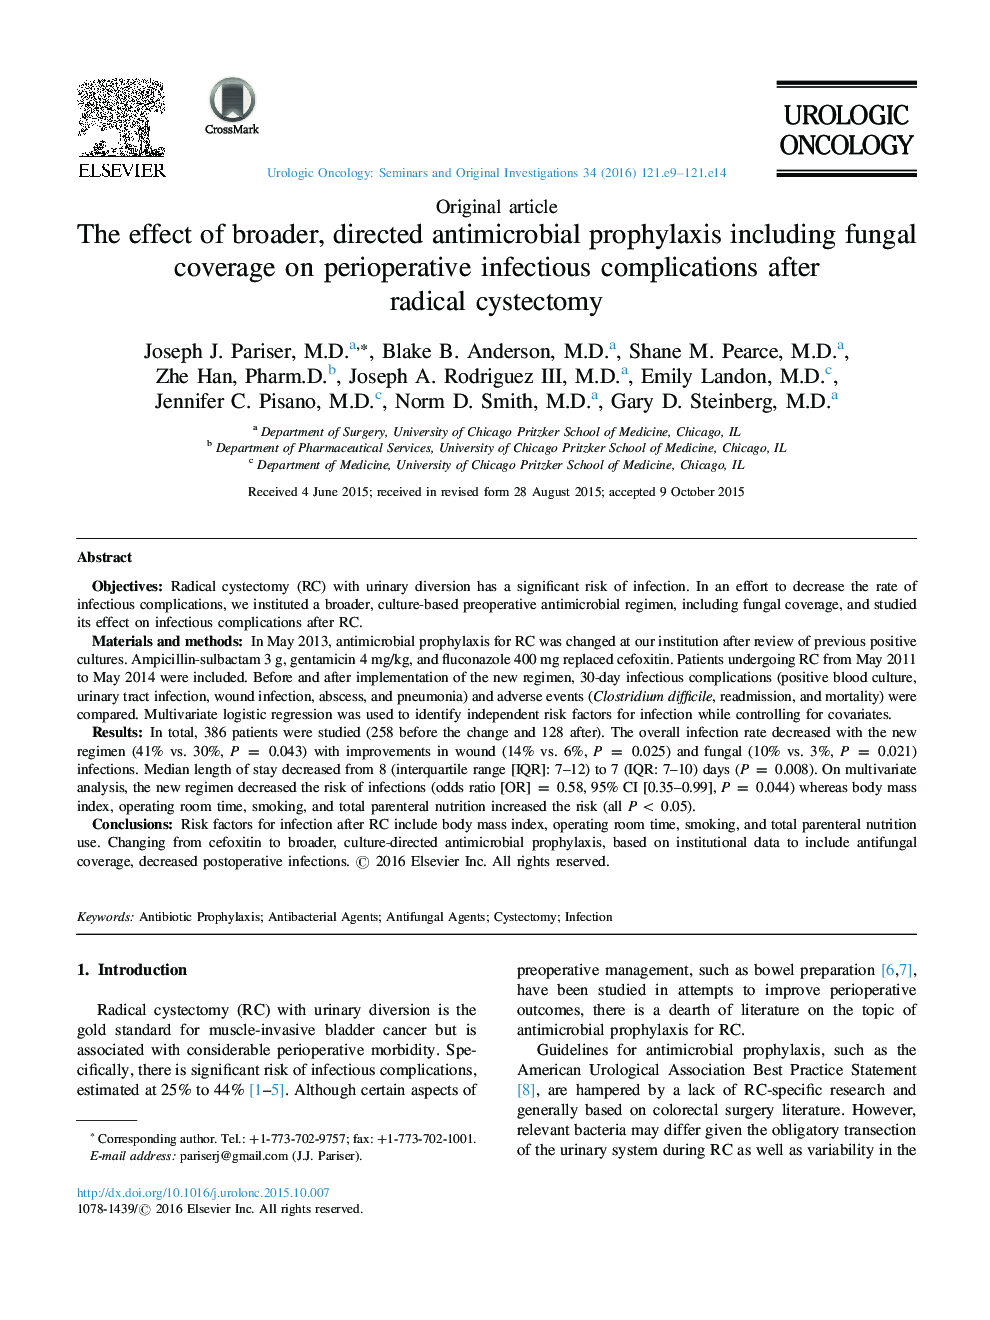 The effect of broader, directed antimicrobial prophylaxis including fungal coverage on perioperative infectious complications after radical cystectomy